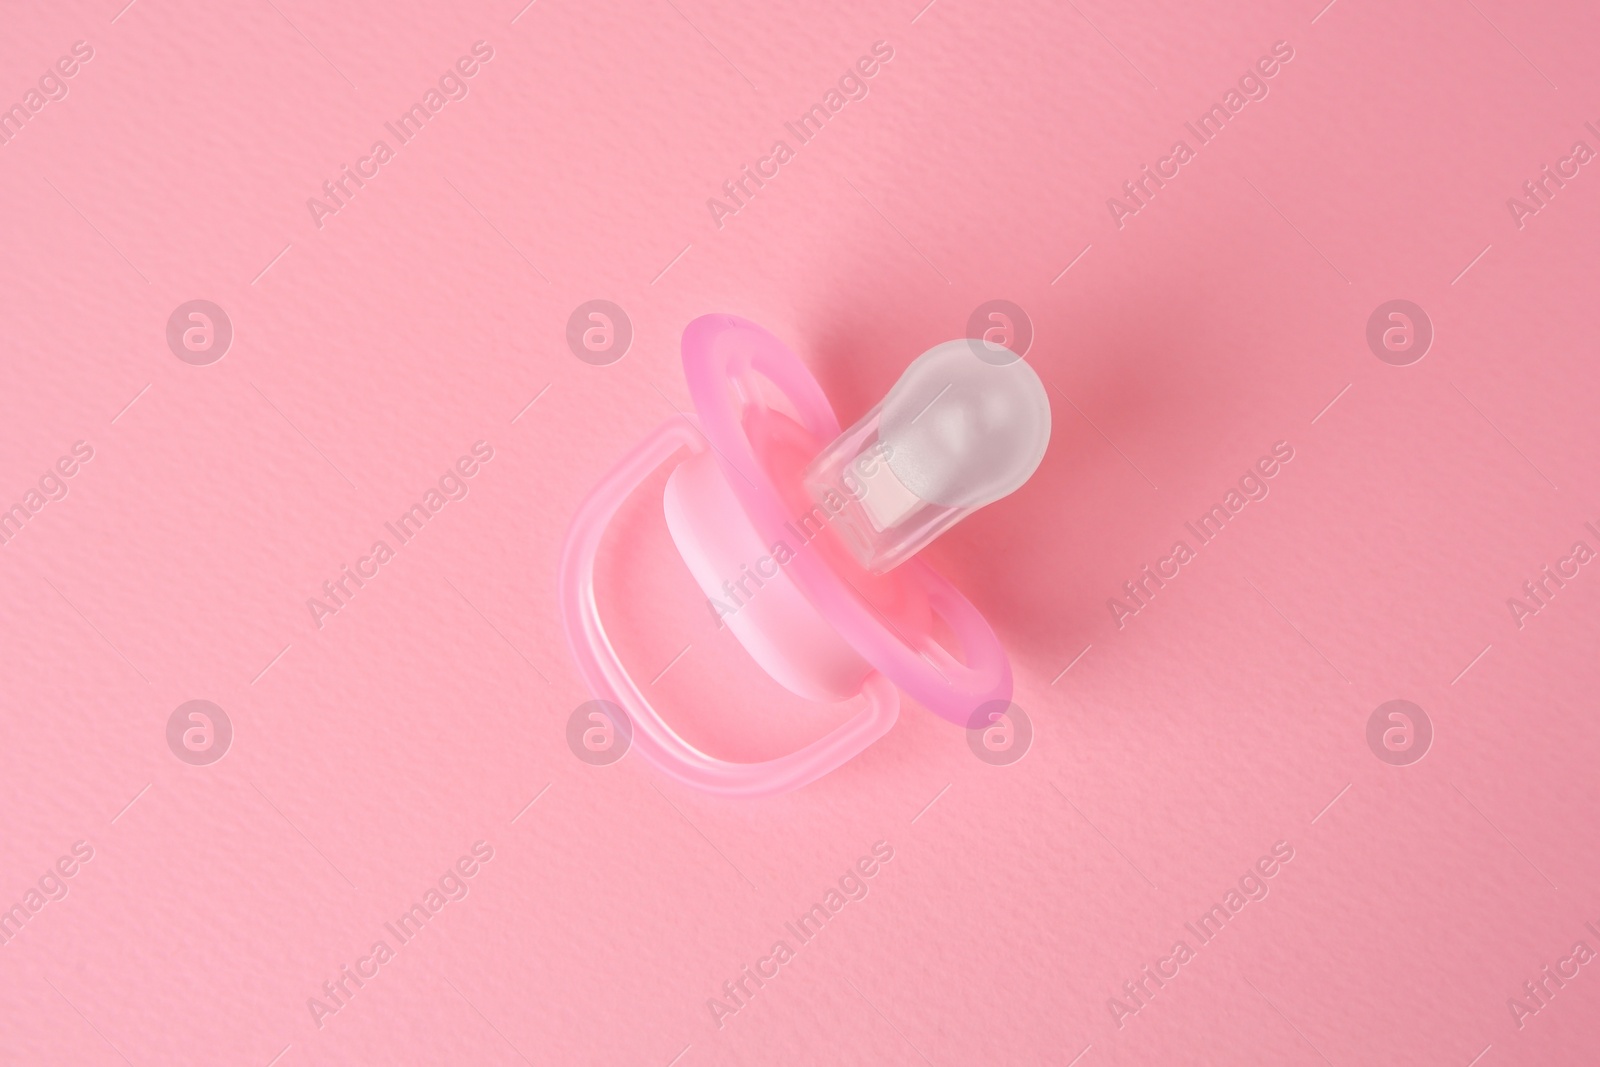 Photo of New baby pacifier on pink background, top view